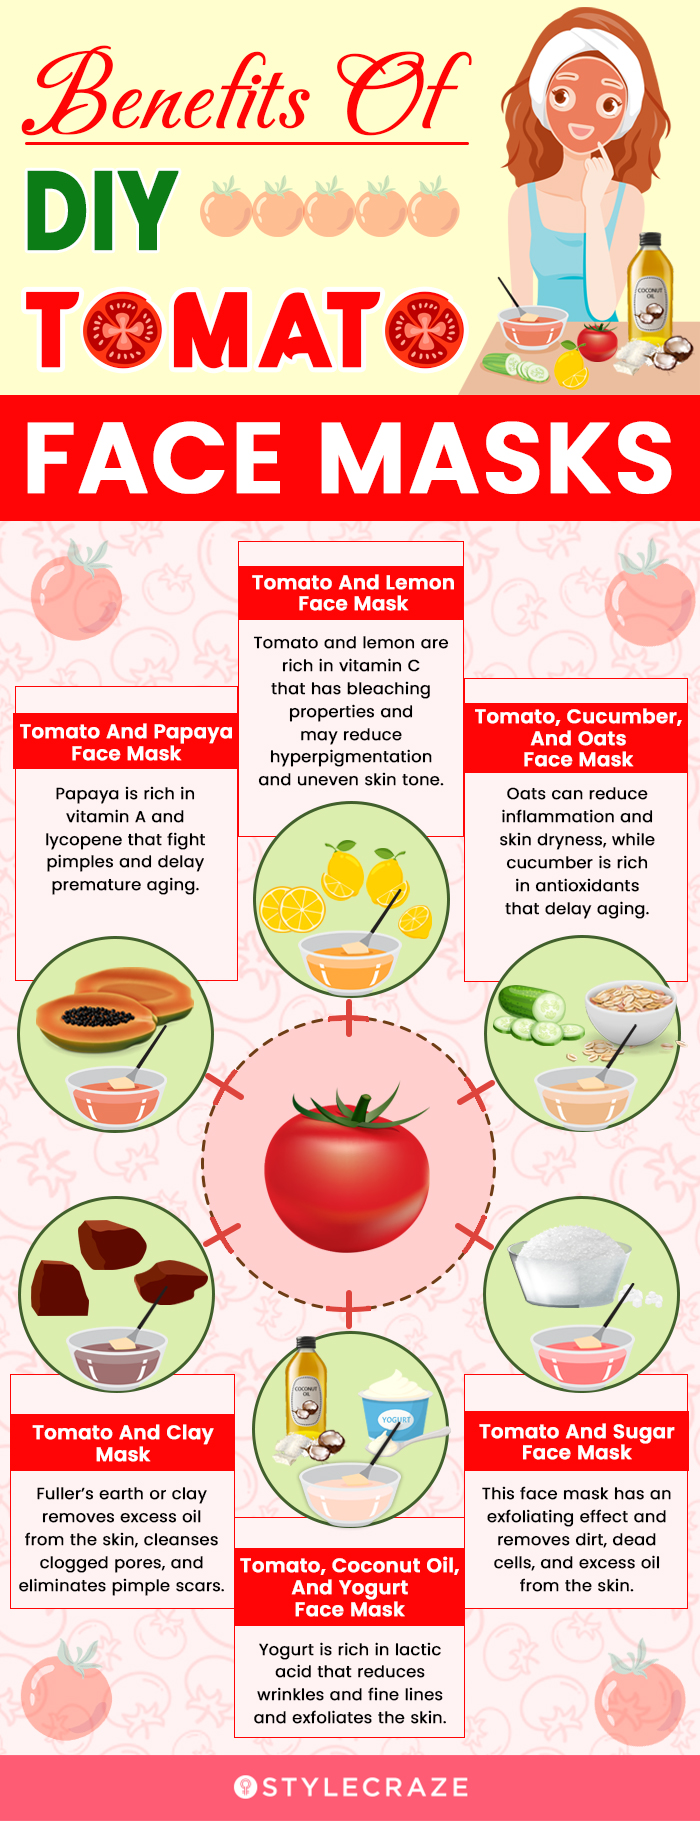 benefits of some important diy tomato face masks (infographic)